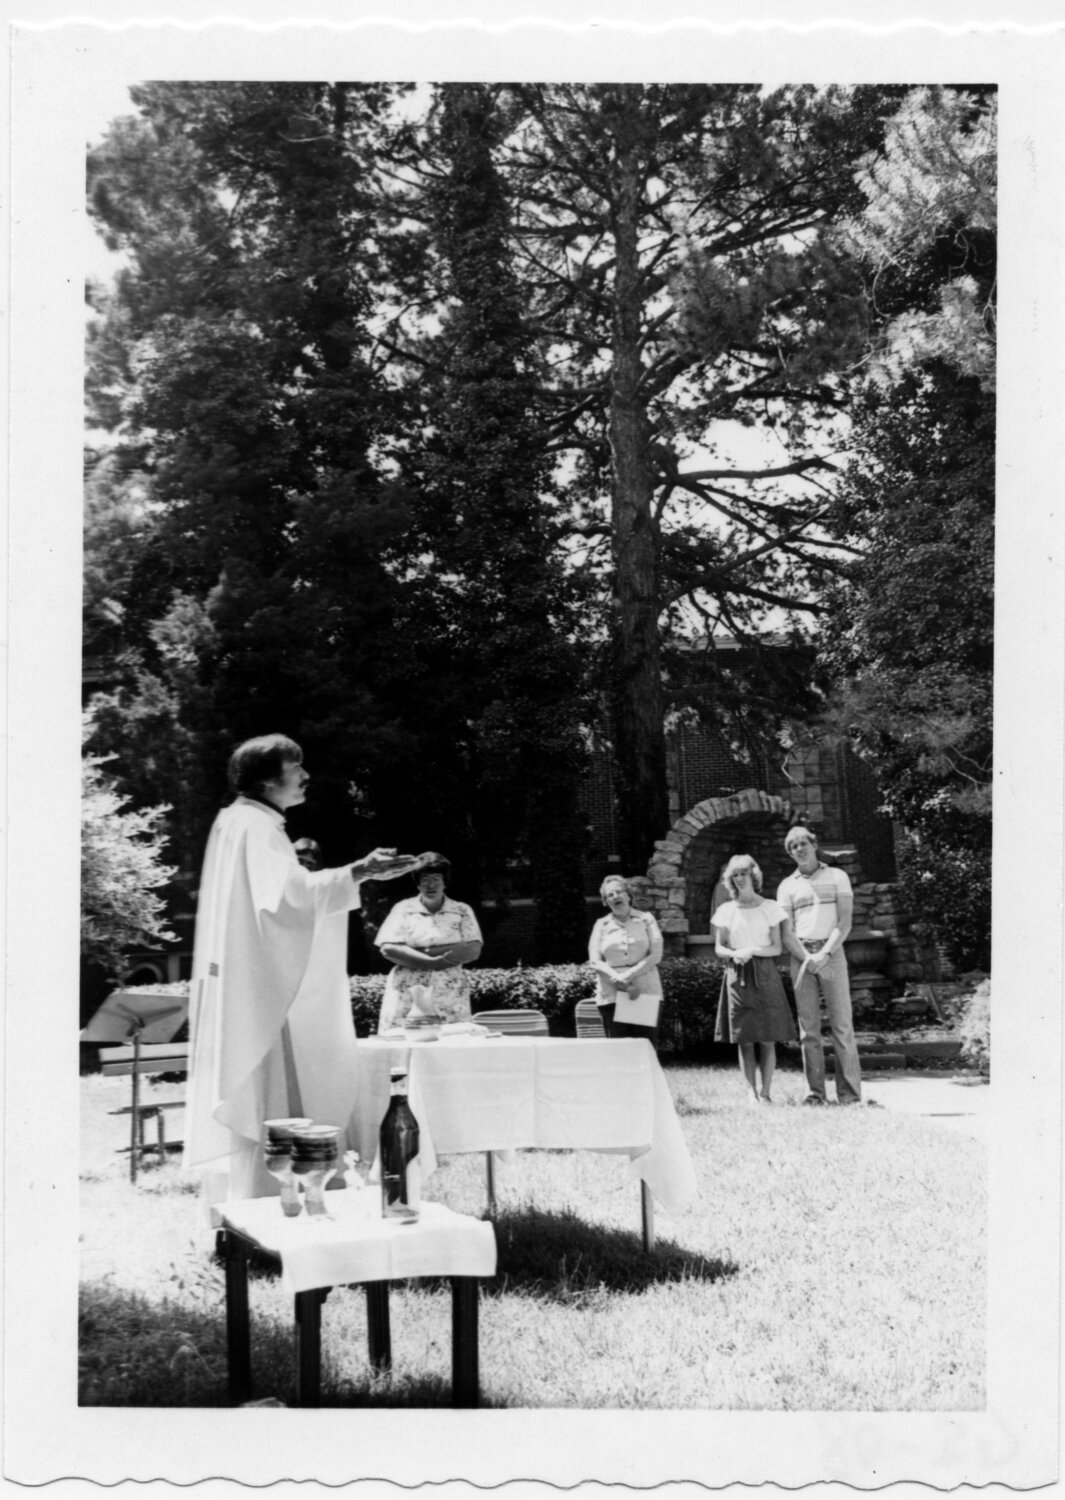 Father Tom Welk offers Mass to students, faculty and staff near the Marian Grotto just outside of Sacred Heart Hall.